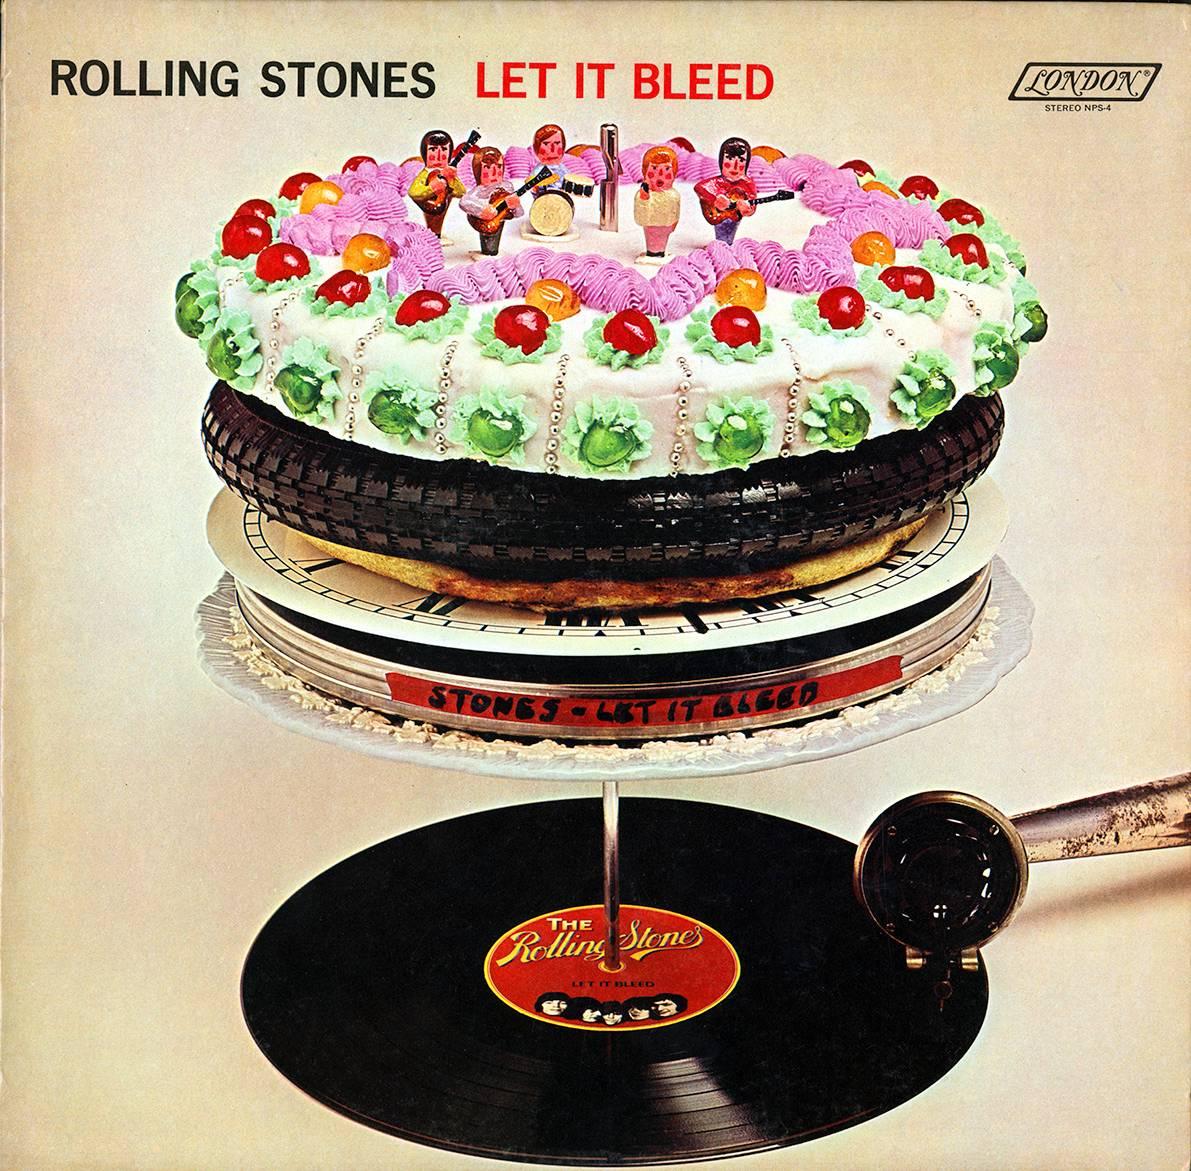 Original ROLLING STONES Let It Bleed Vinyl Record & Poster - Art by Unknown